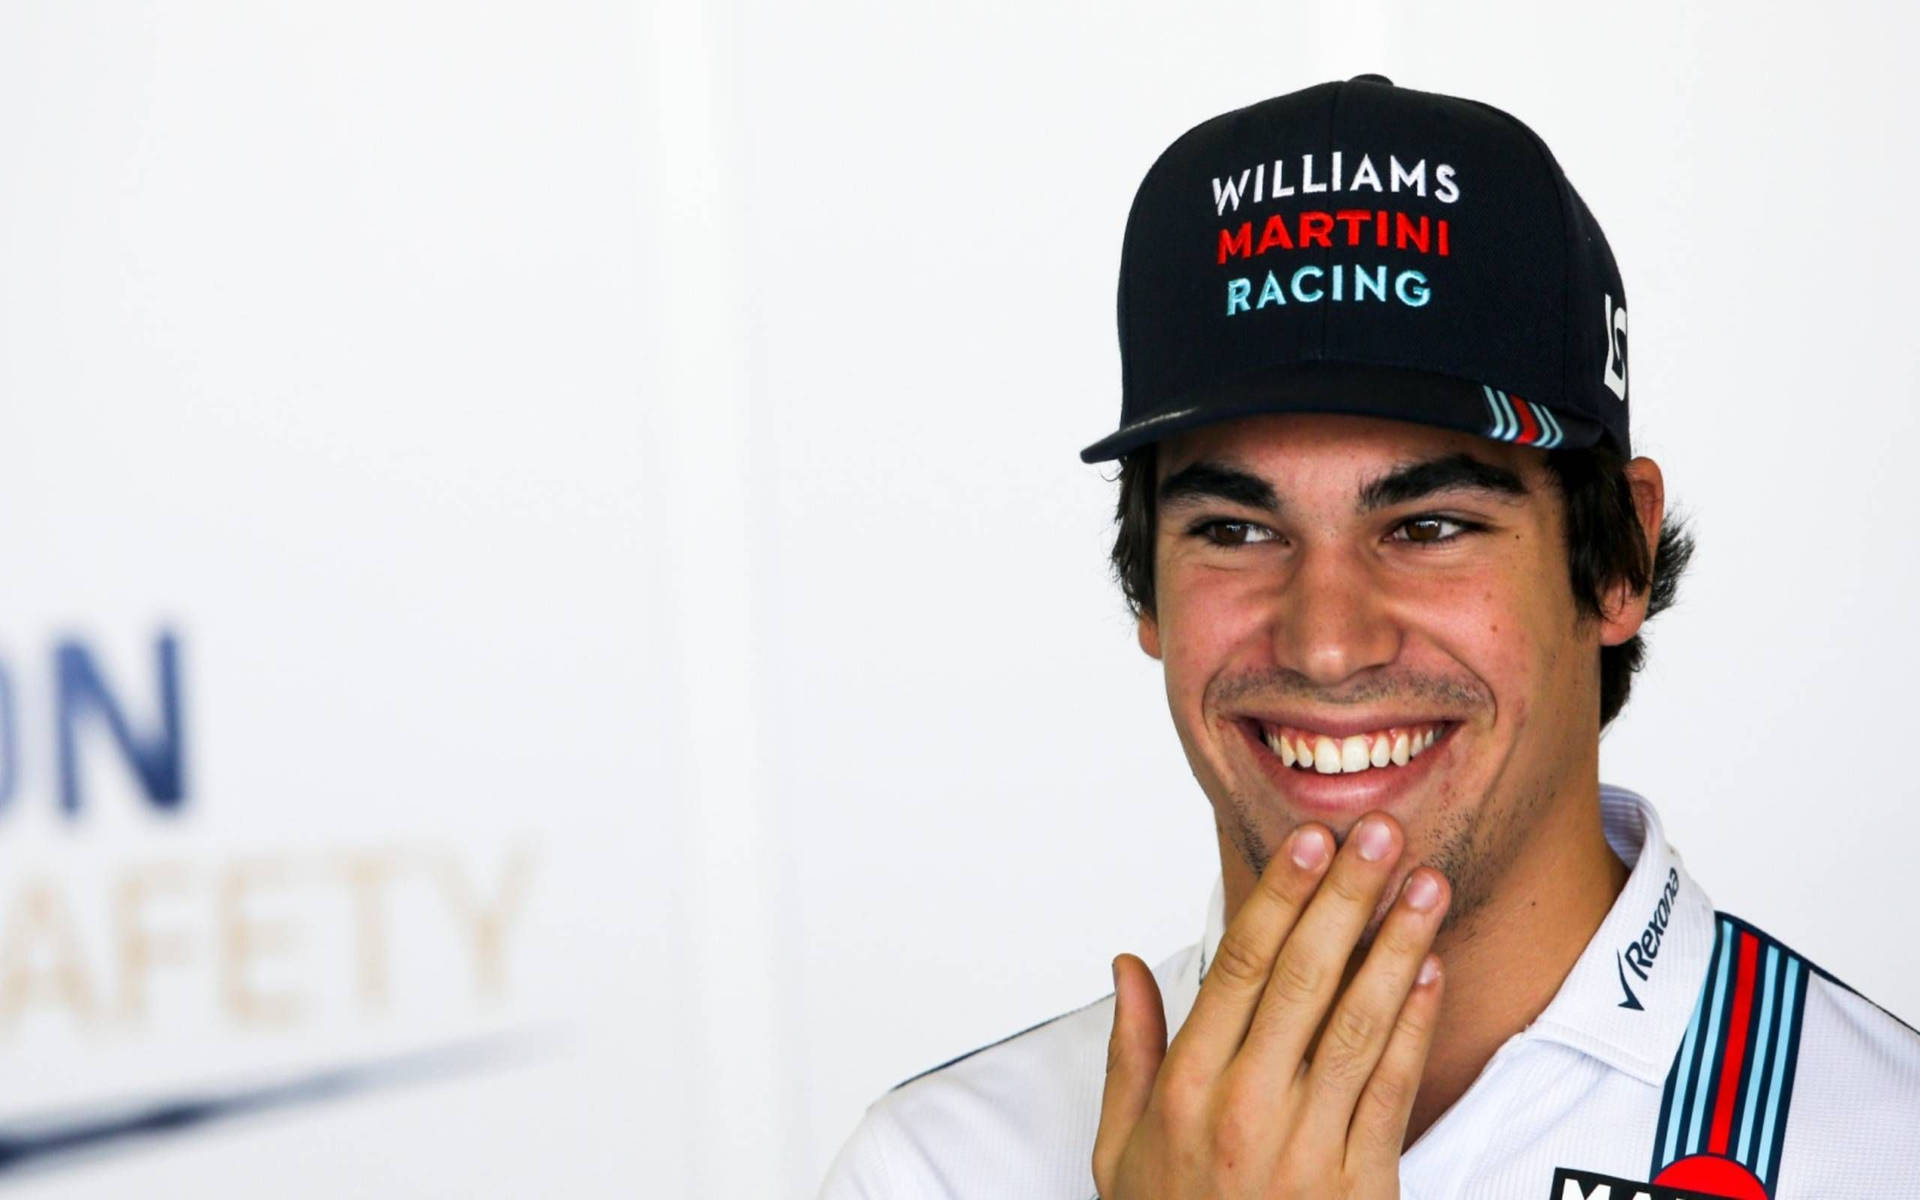 Lancestroll Med Handen På Hakan (as A Suggestion For A Computer Or Mobile Wallpaper - An Image Of Lance Stroll With His Hand On His Chin). Wallpaper